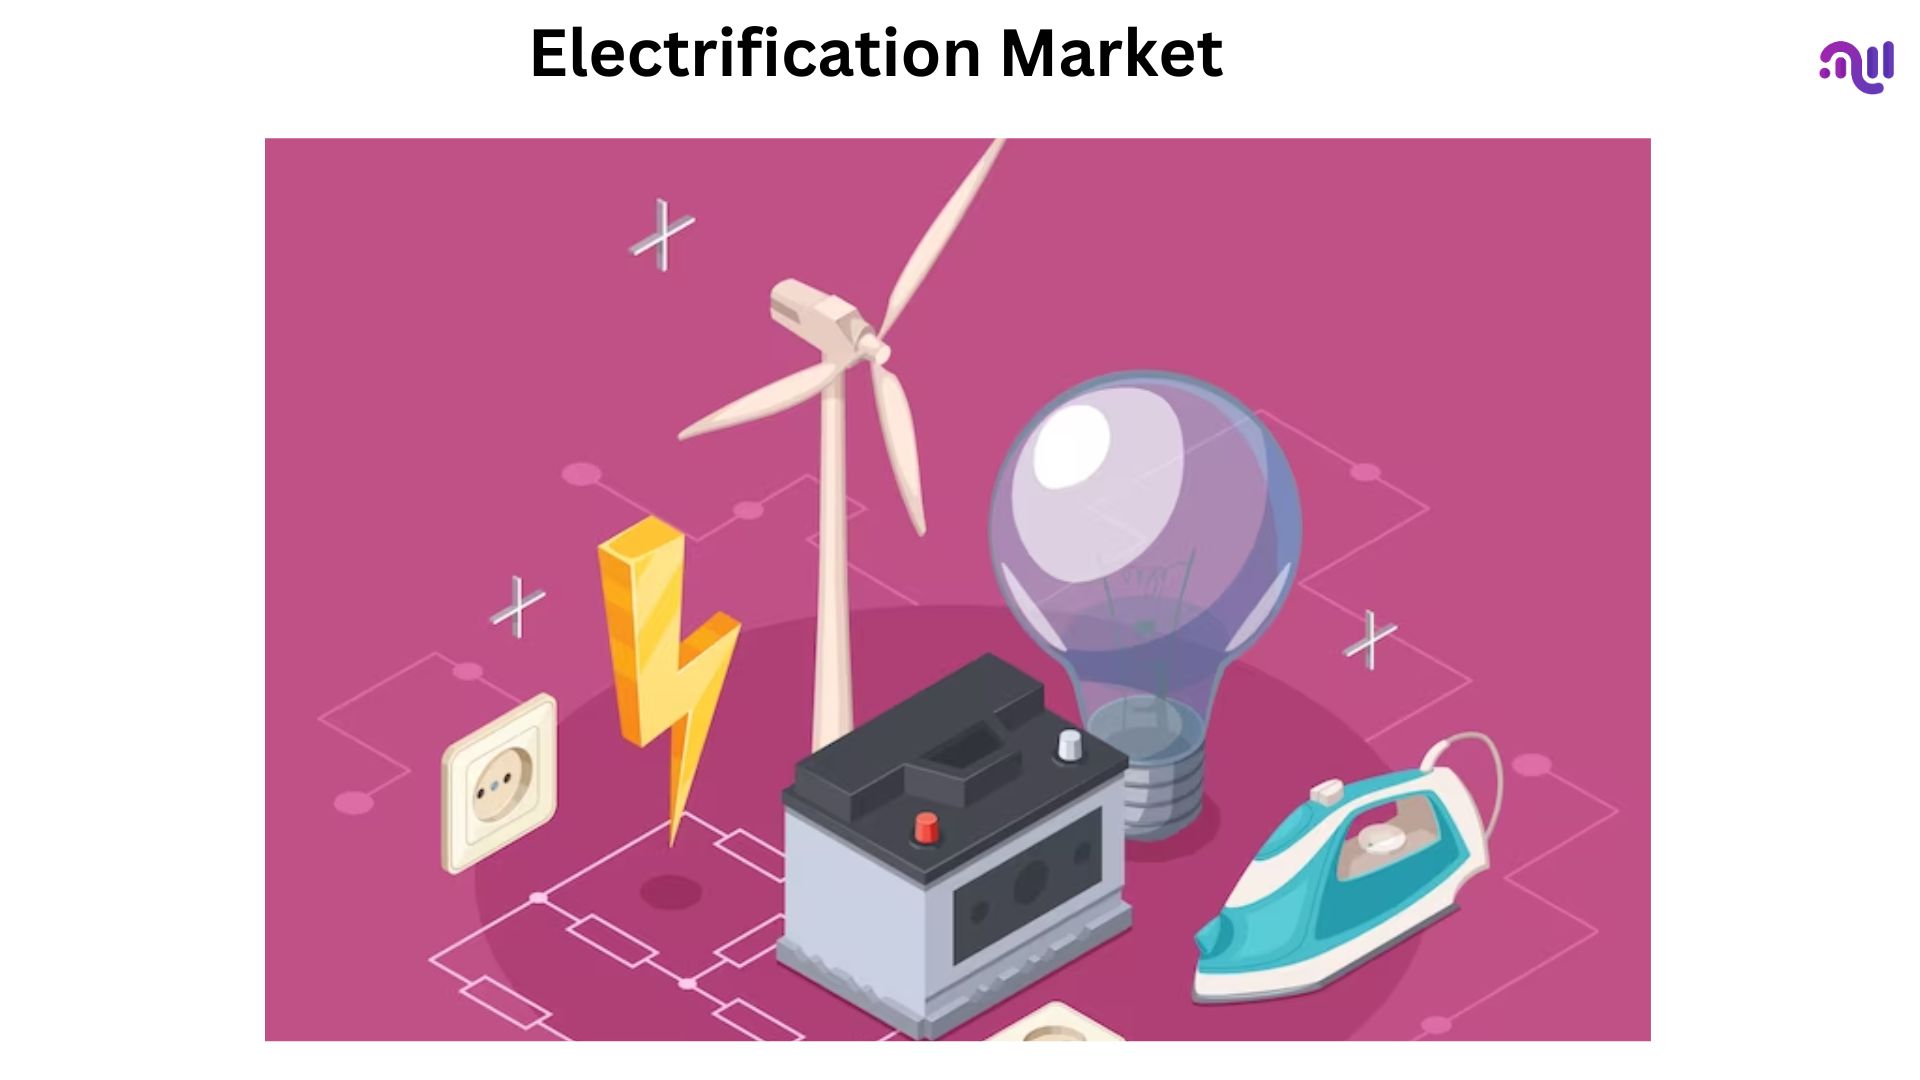 Electrification Market Expected To Achieve USD 170.4 Bn In Revenues By 2032, Driven By A 8.9% CAGR